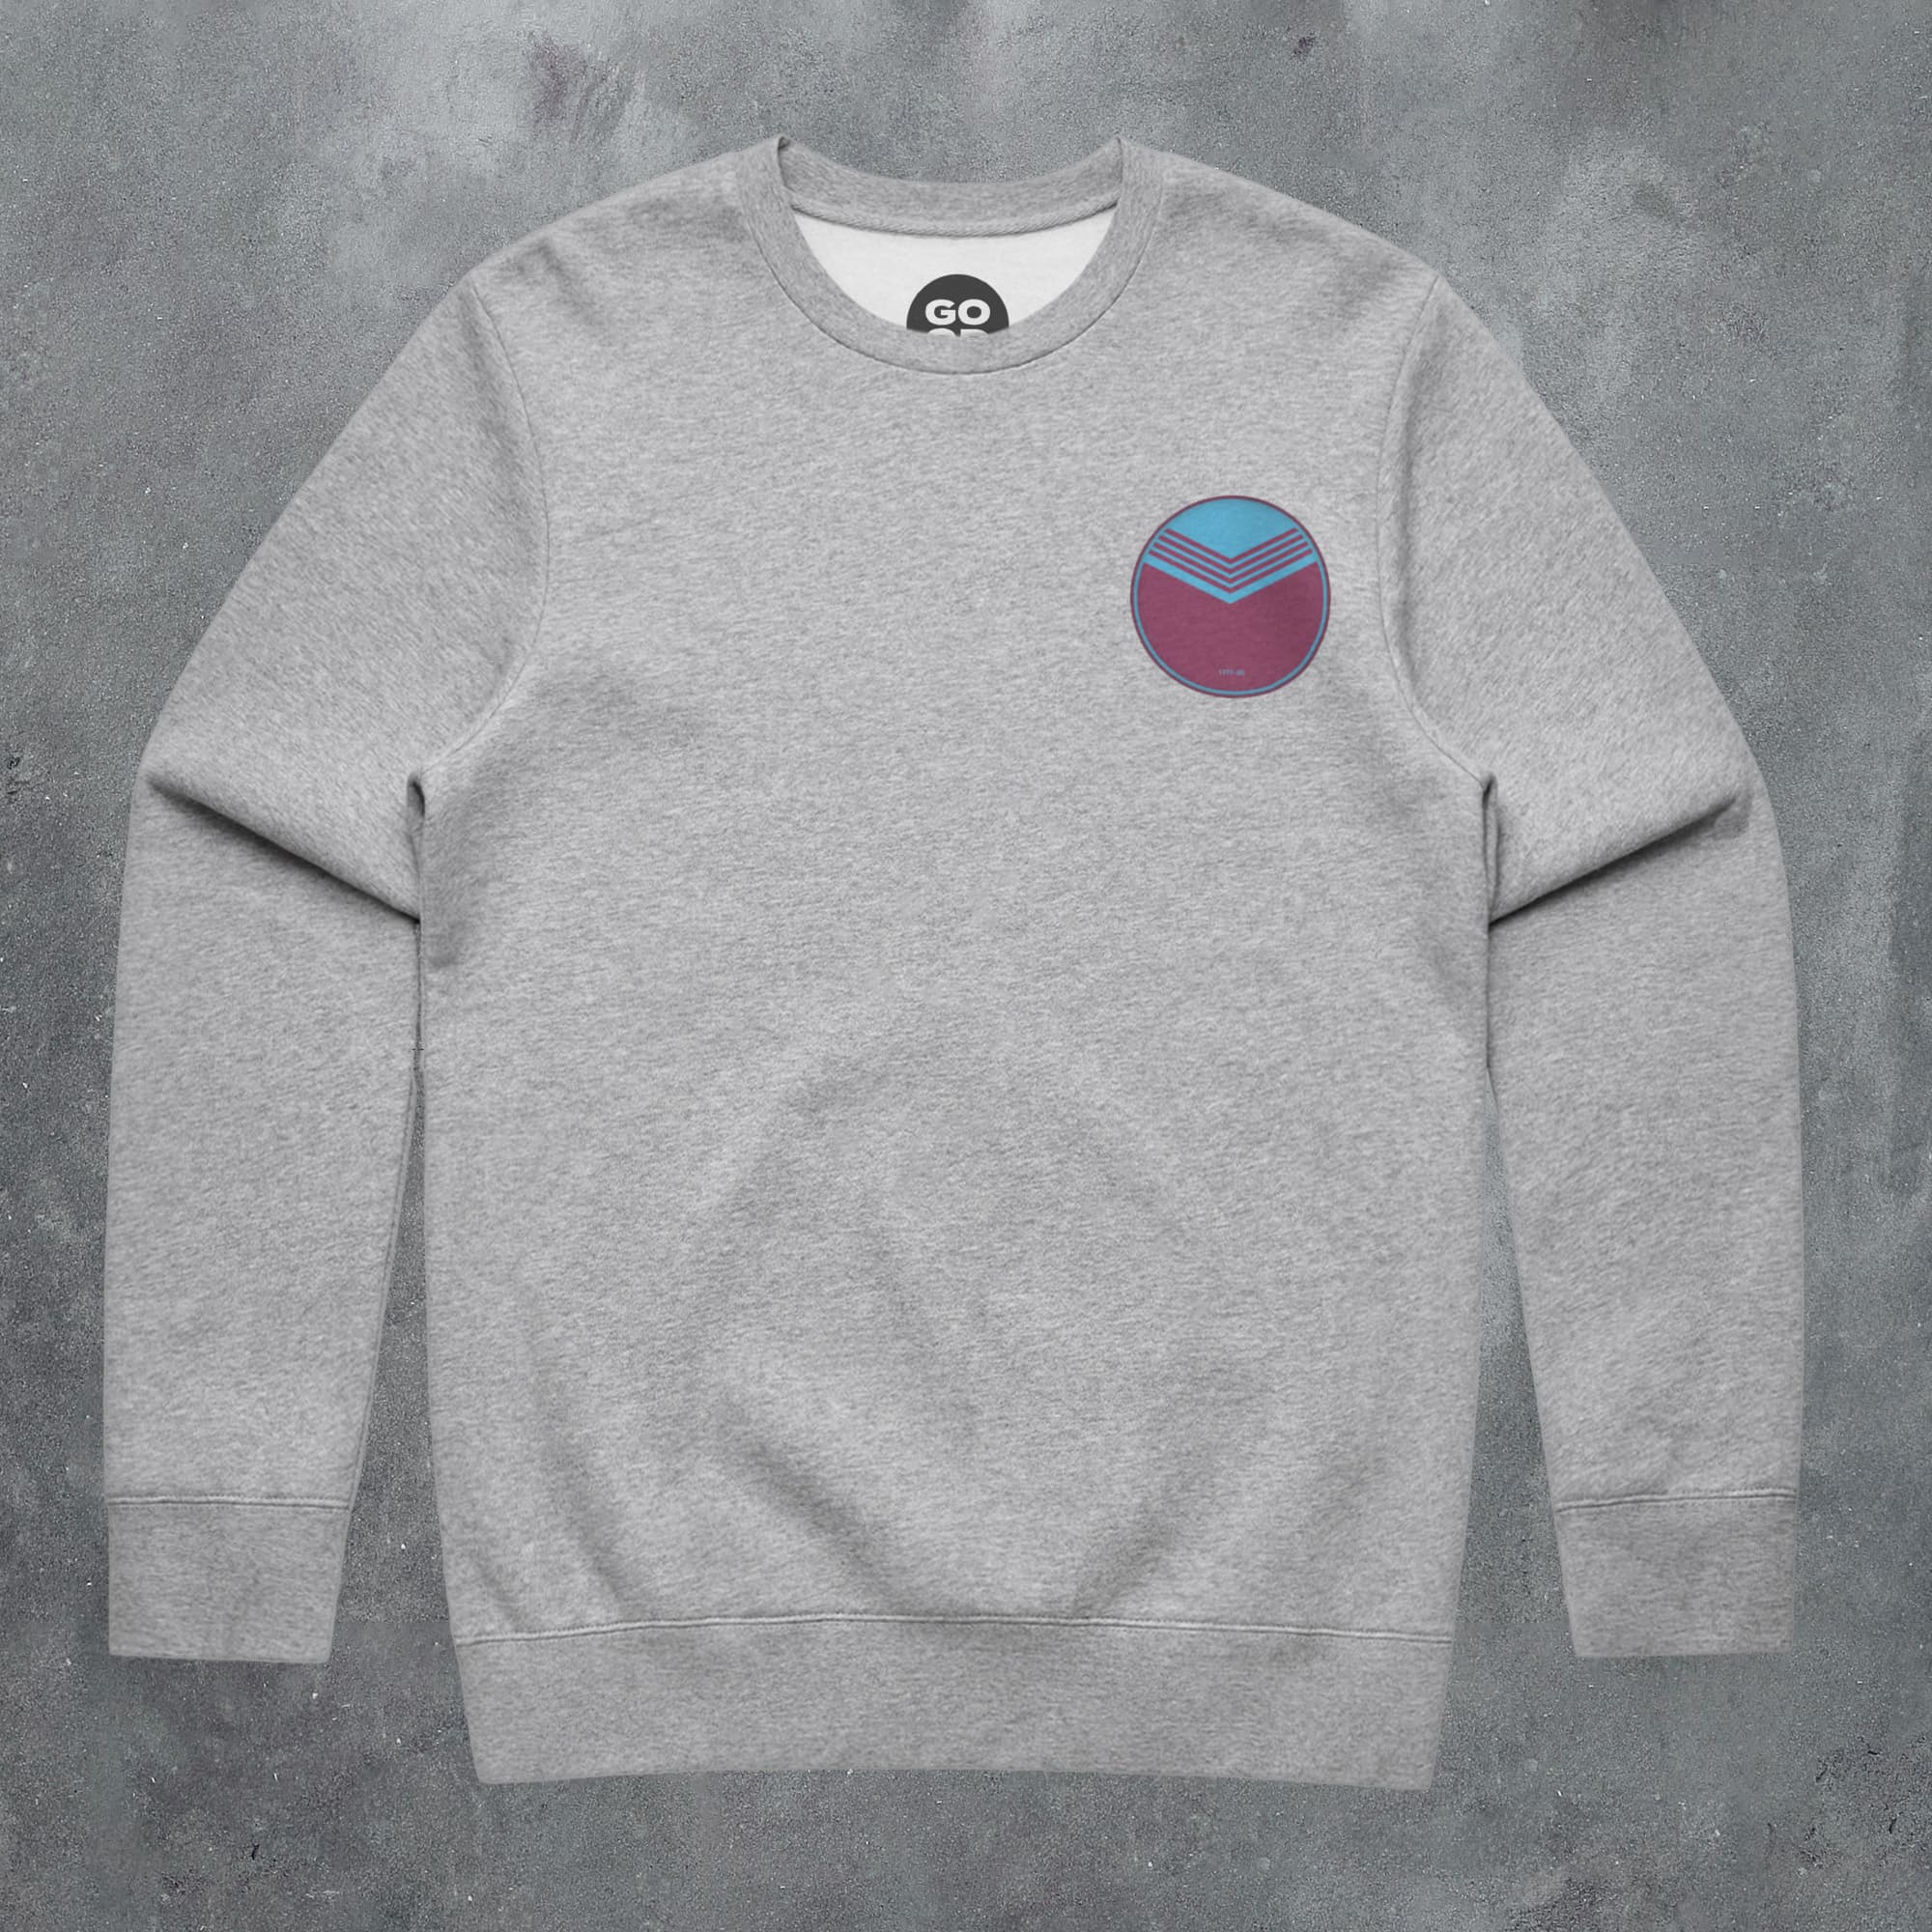 a grey sweatshirt with a blue and red patch on the chest